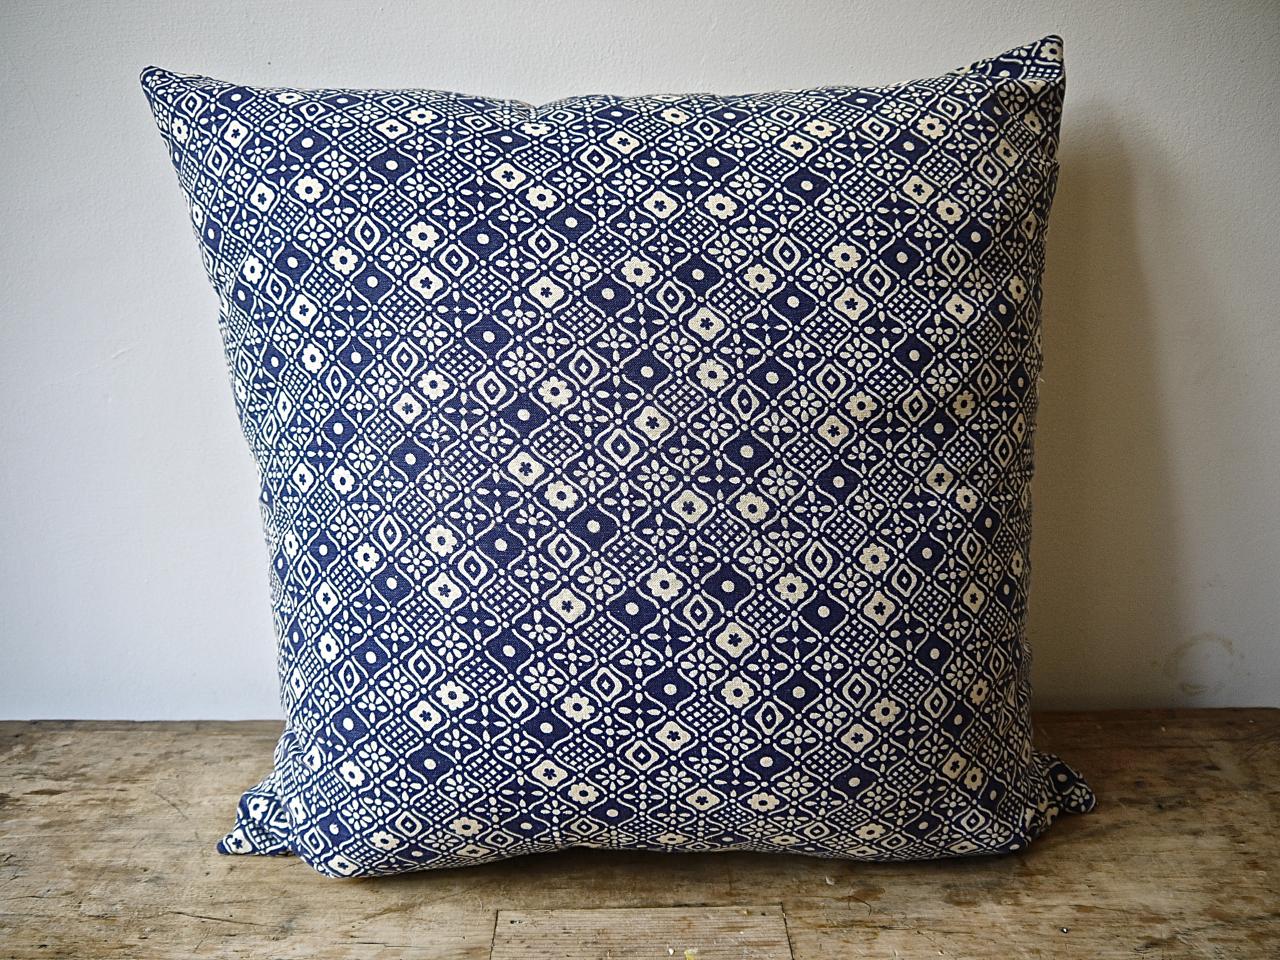 French midcentury cotton cushion printed with a simple and striking indigo blue and white abstract design. Self-backed and slip-stitched closed with a duck feather cushion pad.